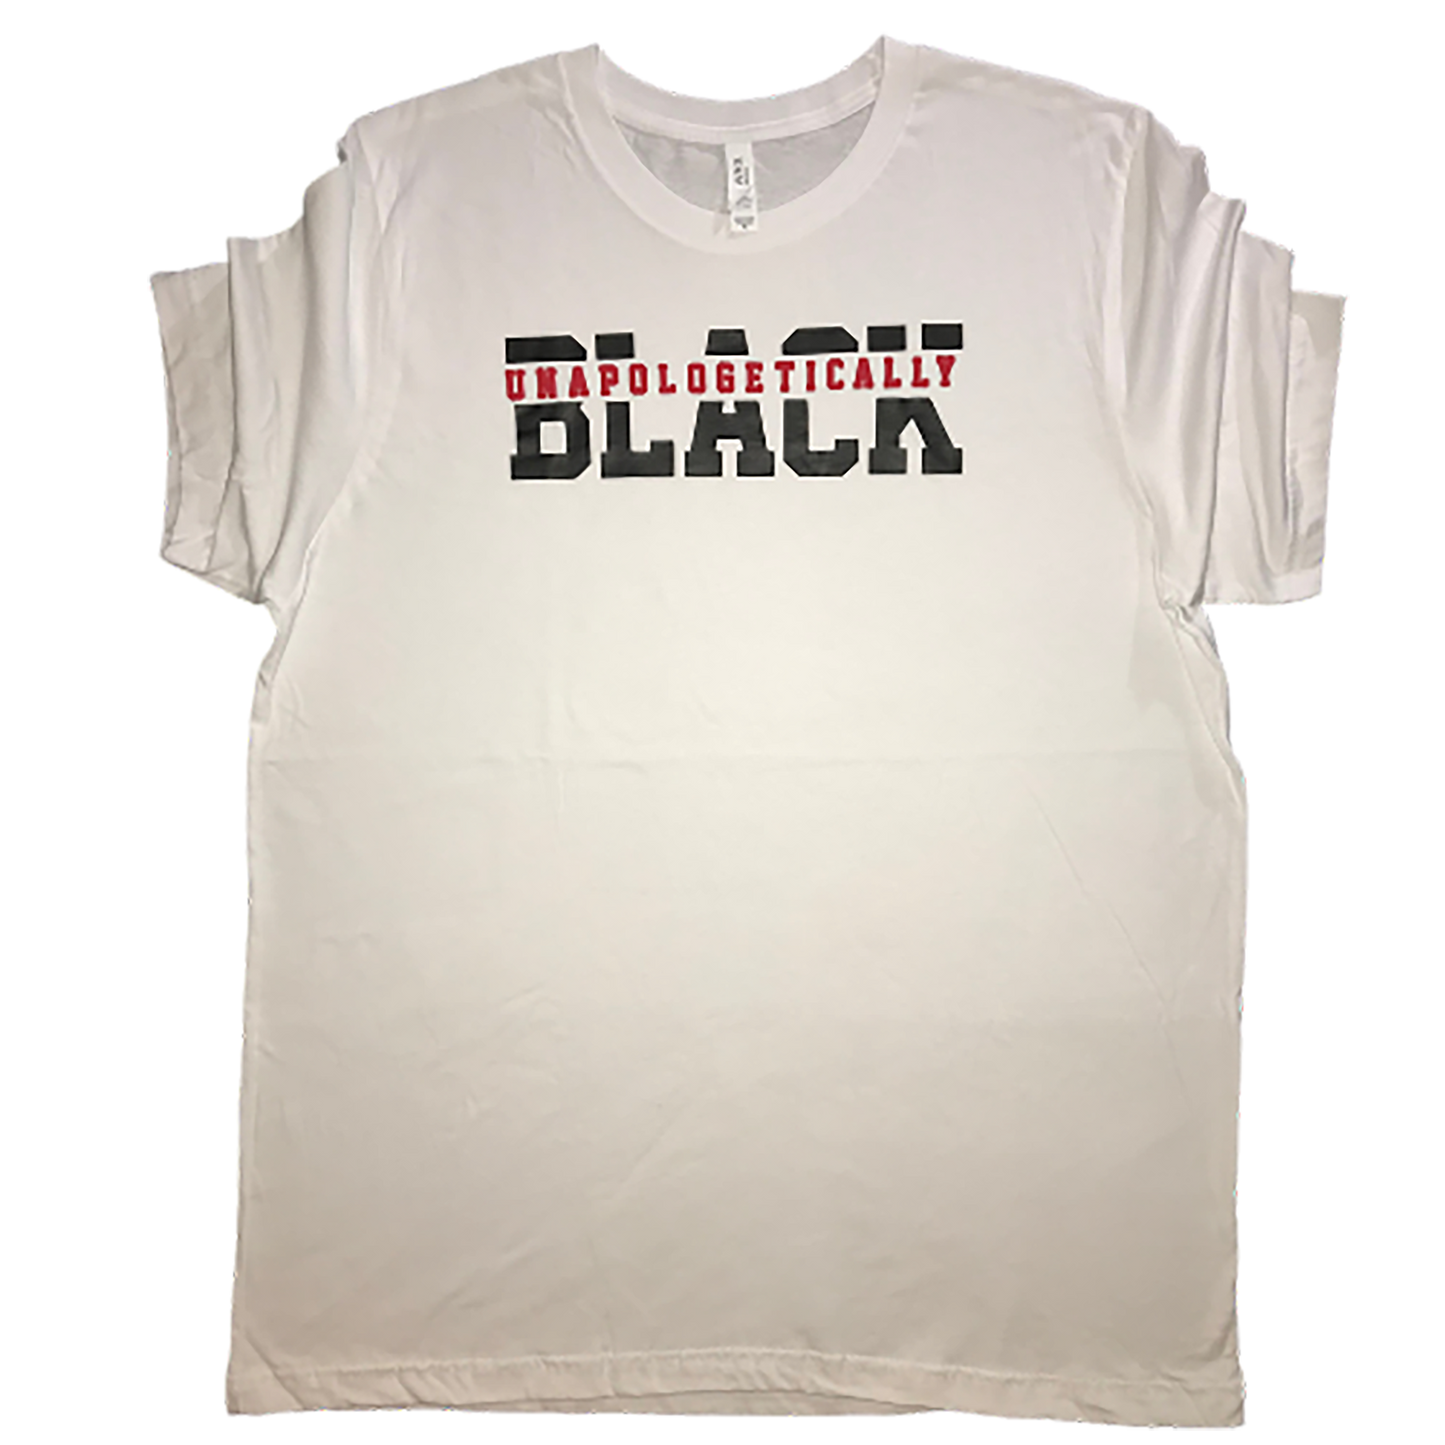 Unapologetically Black Comfortable Short Sleeve T-Shirt